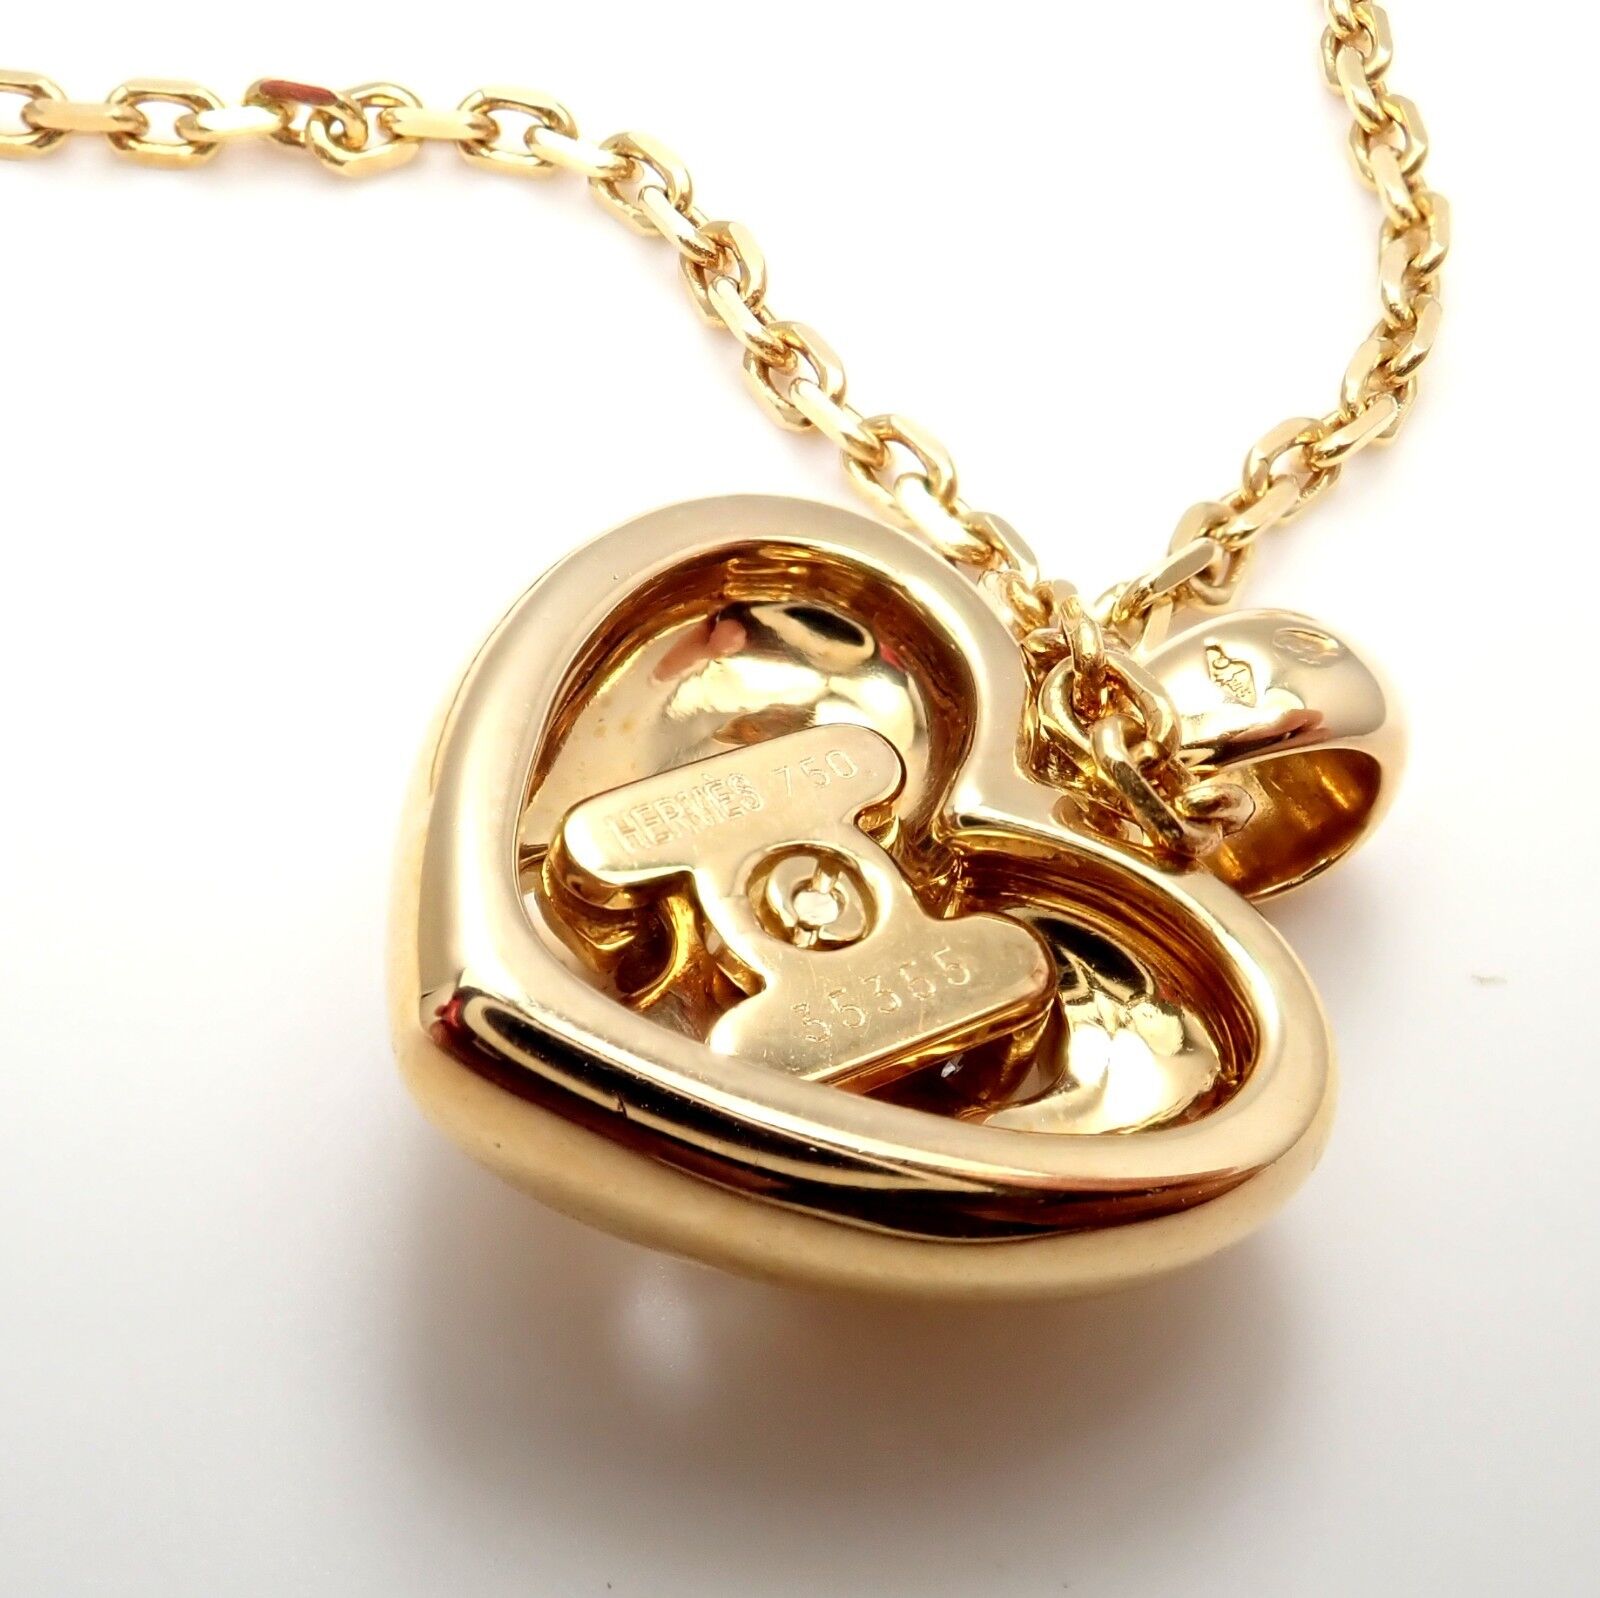 Hermes Jewelry & Watches:Fine Jewelry:Necklaces & Pendants Rare! Authentic Hermes 18k Yellow Gold Diamond H Heart Pendant Necklace 14.5"